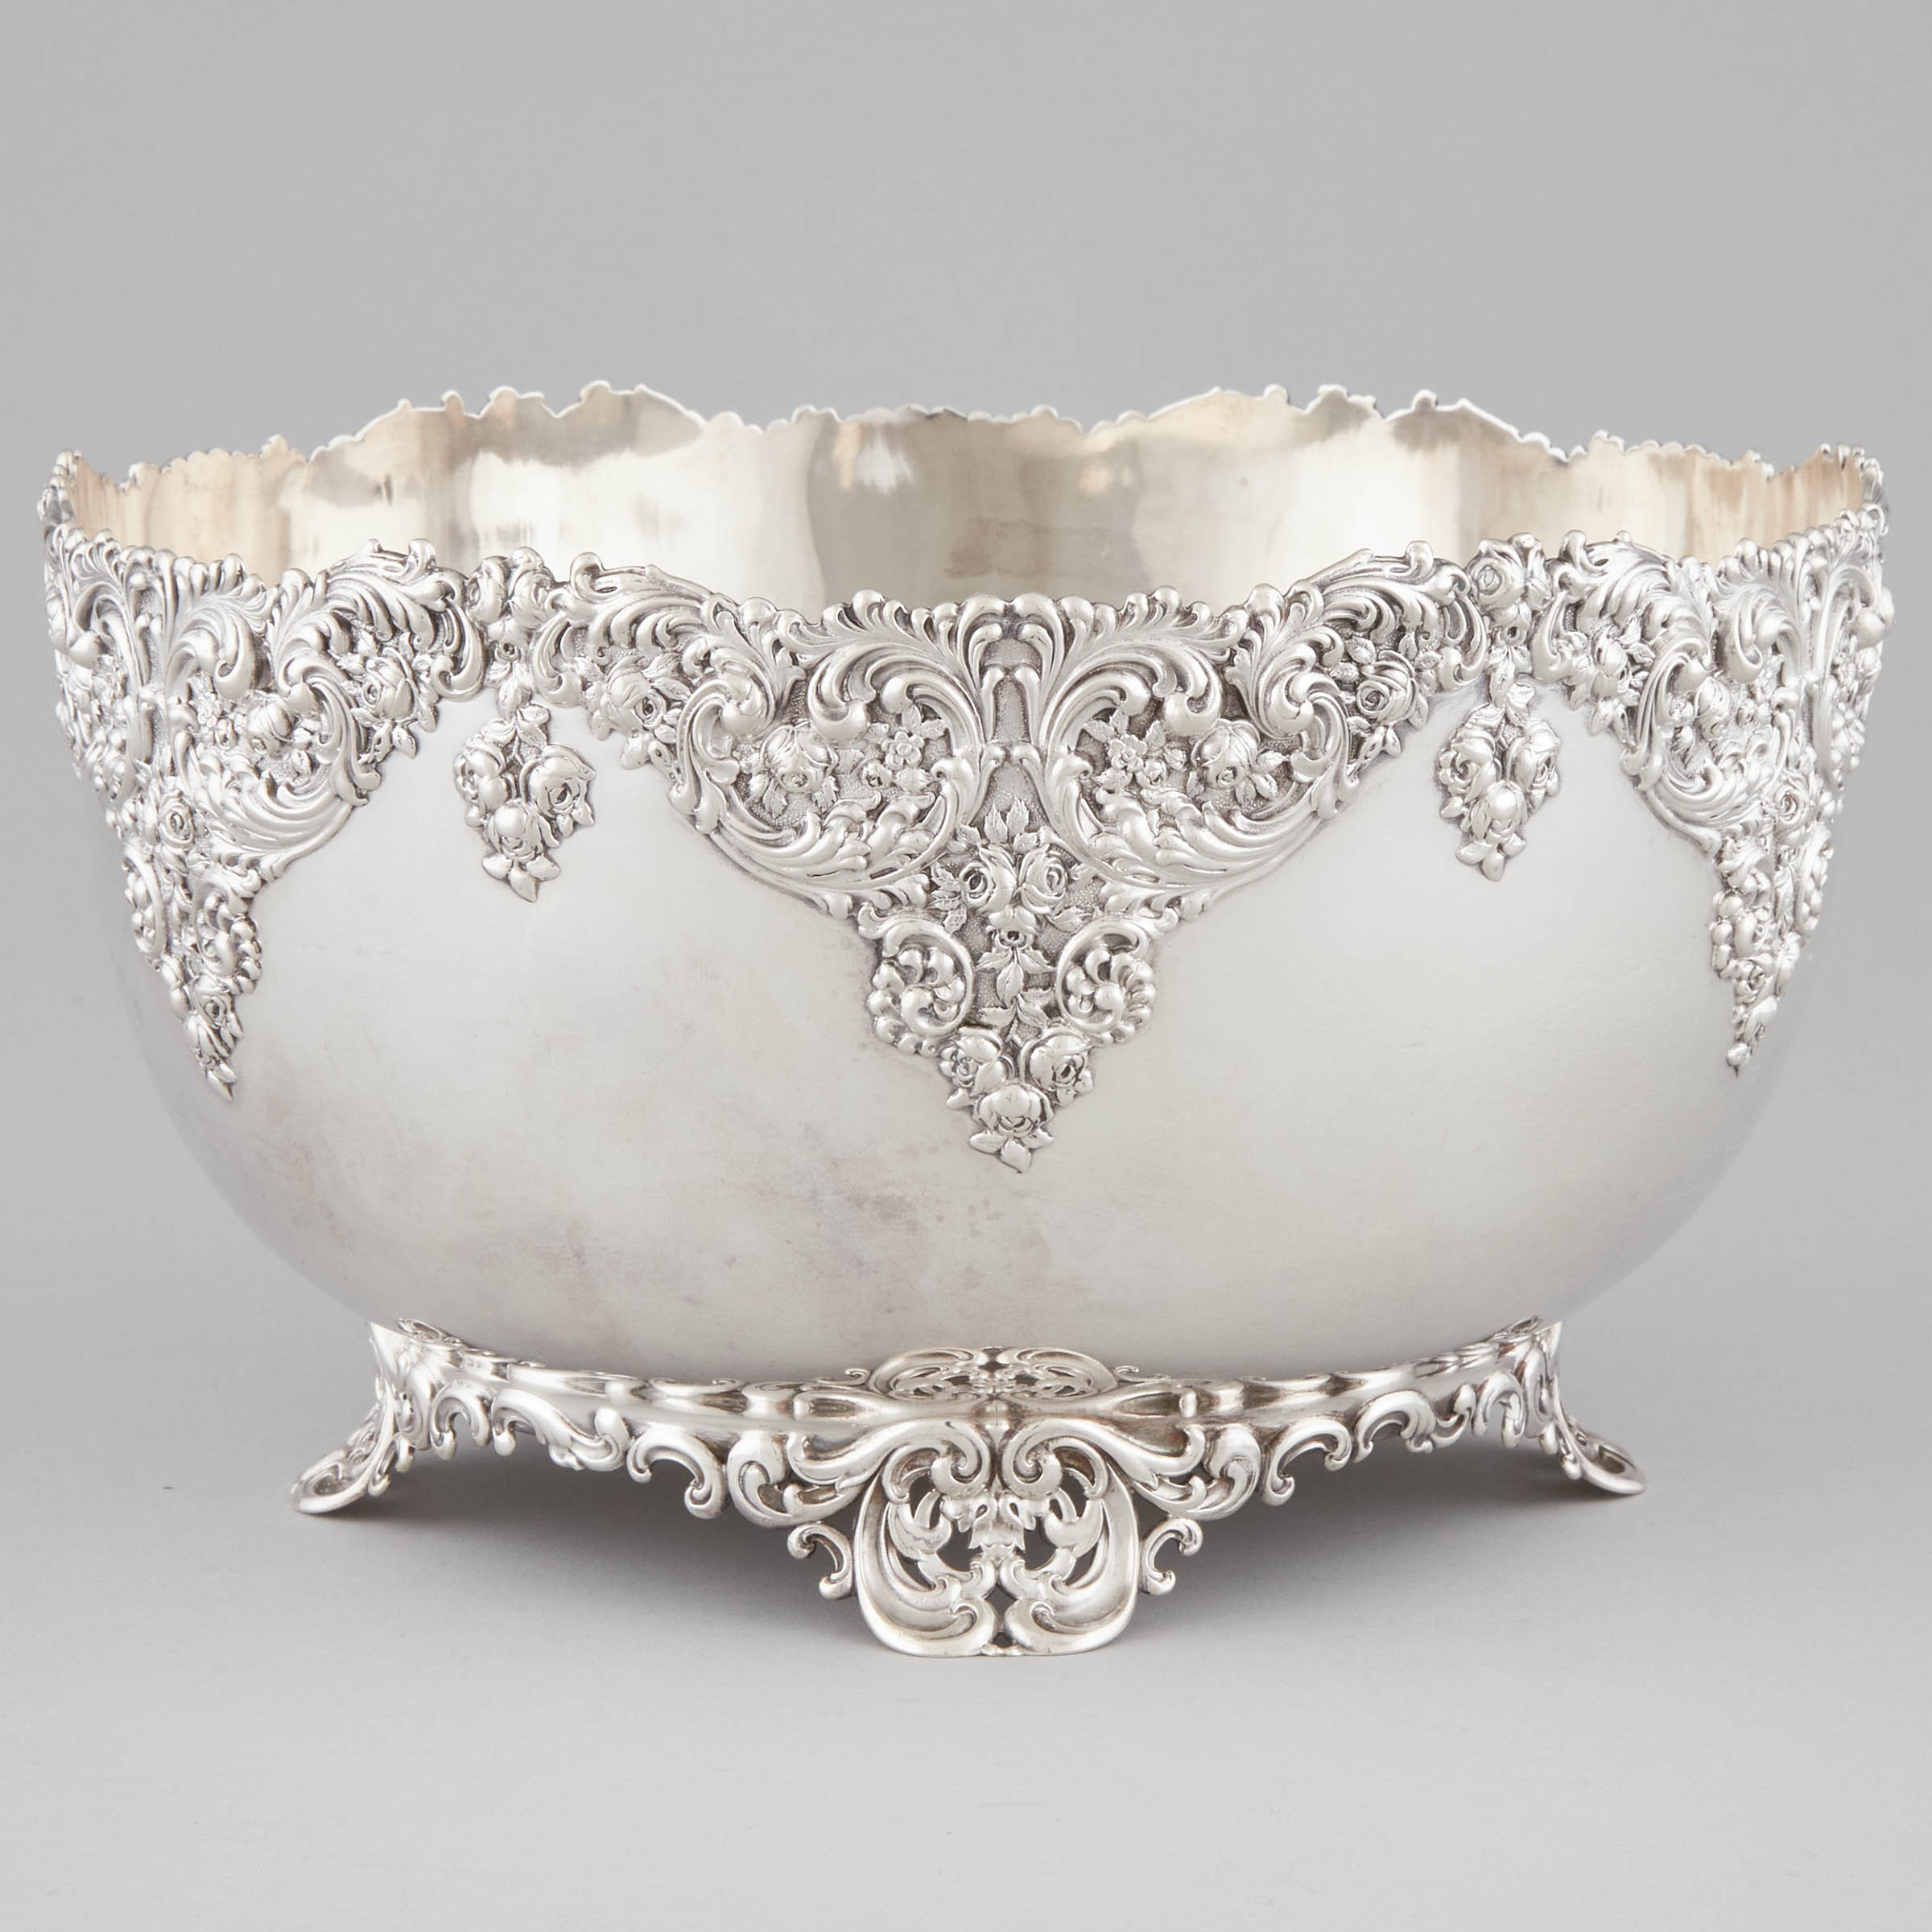 American Silver Footed Bowl, Shreve